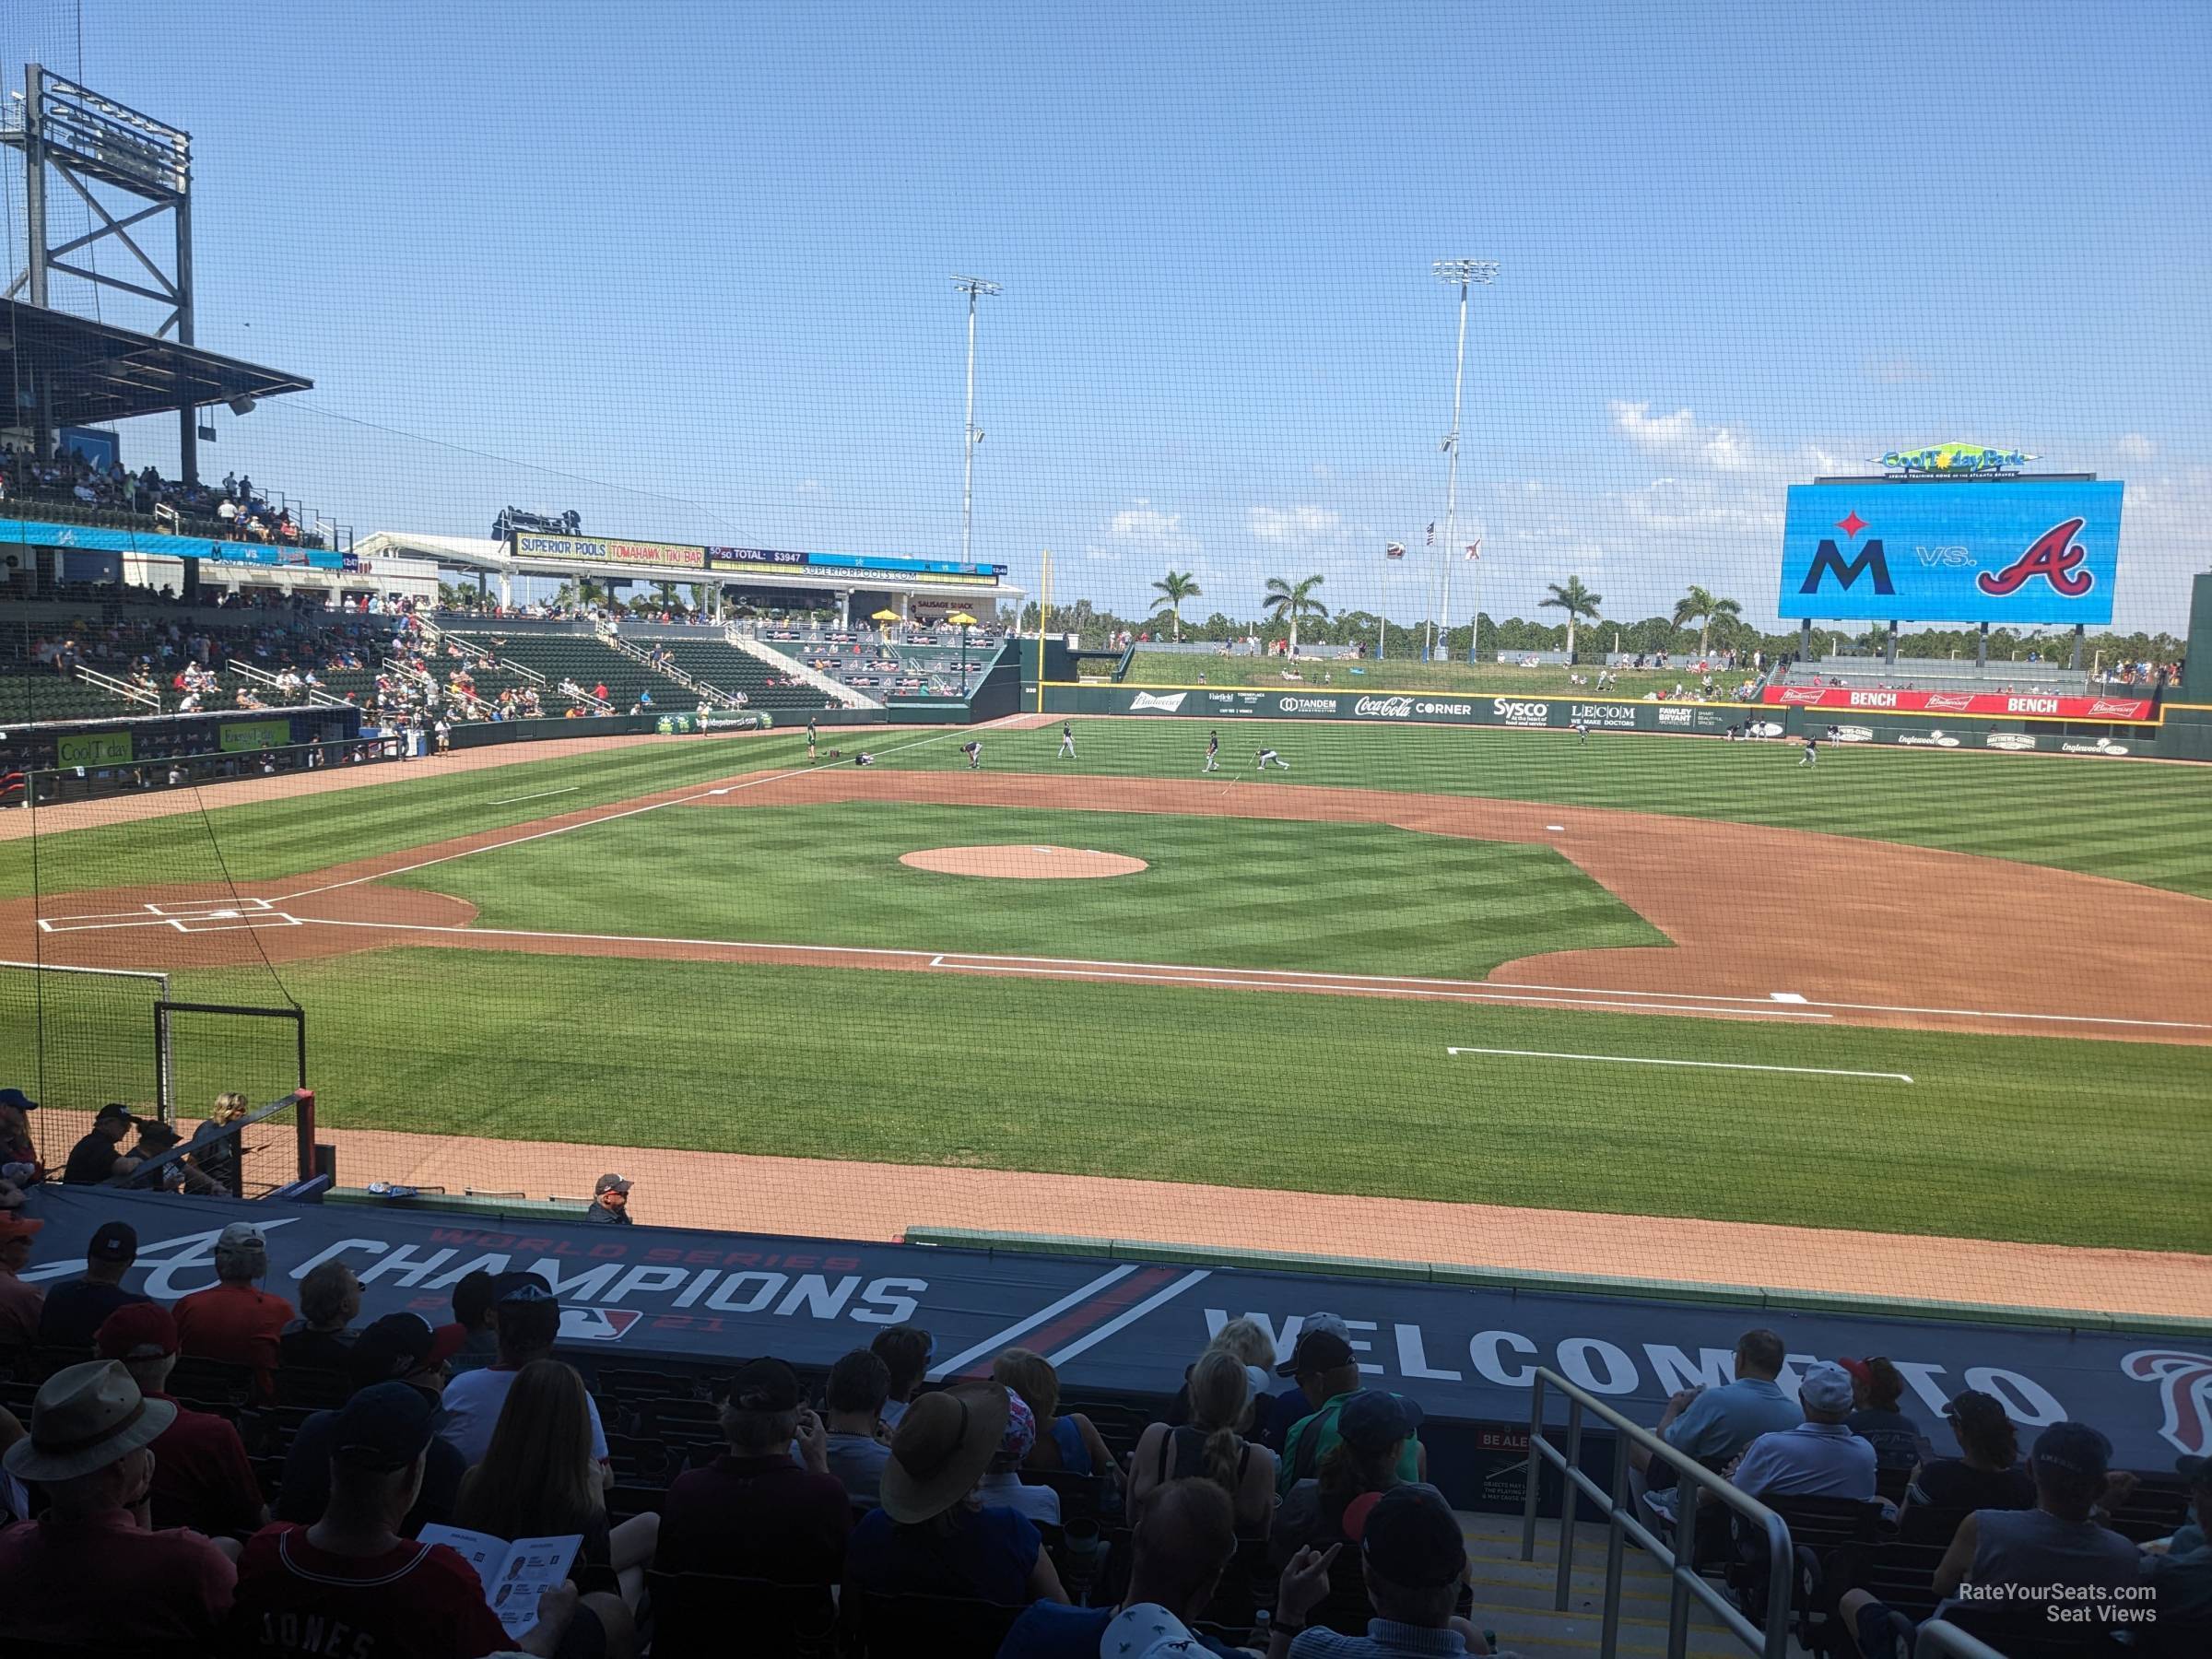 section 109, row 14 seat view  - cooltoday park